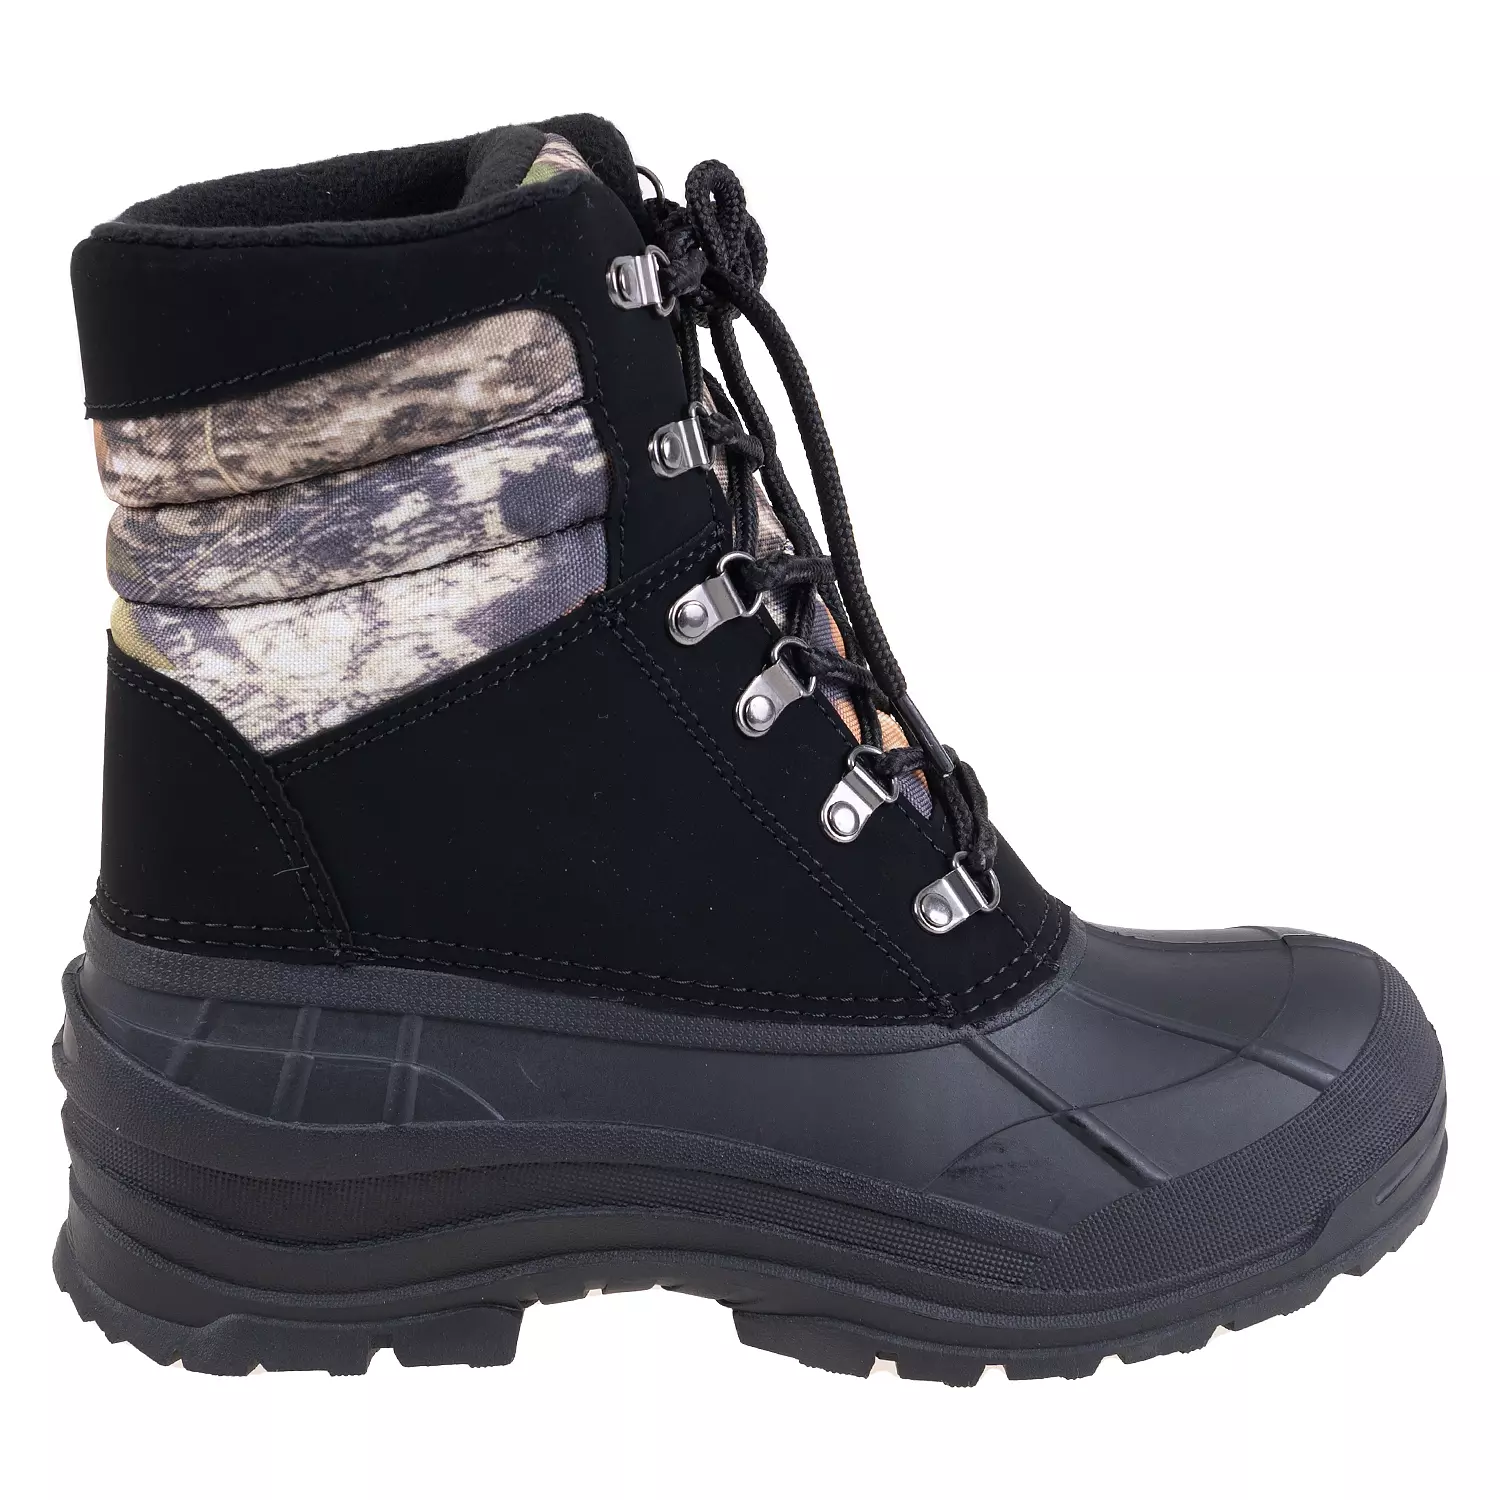 Men's waterproof winter boots with camouflage details, size 10